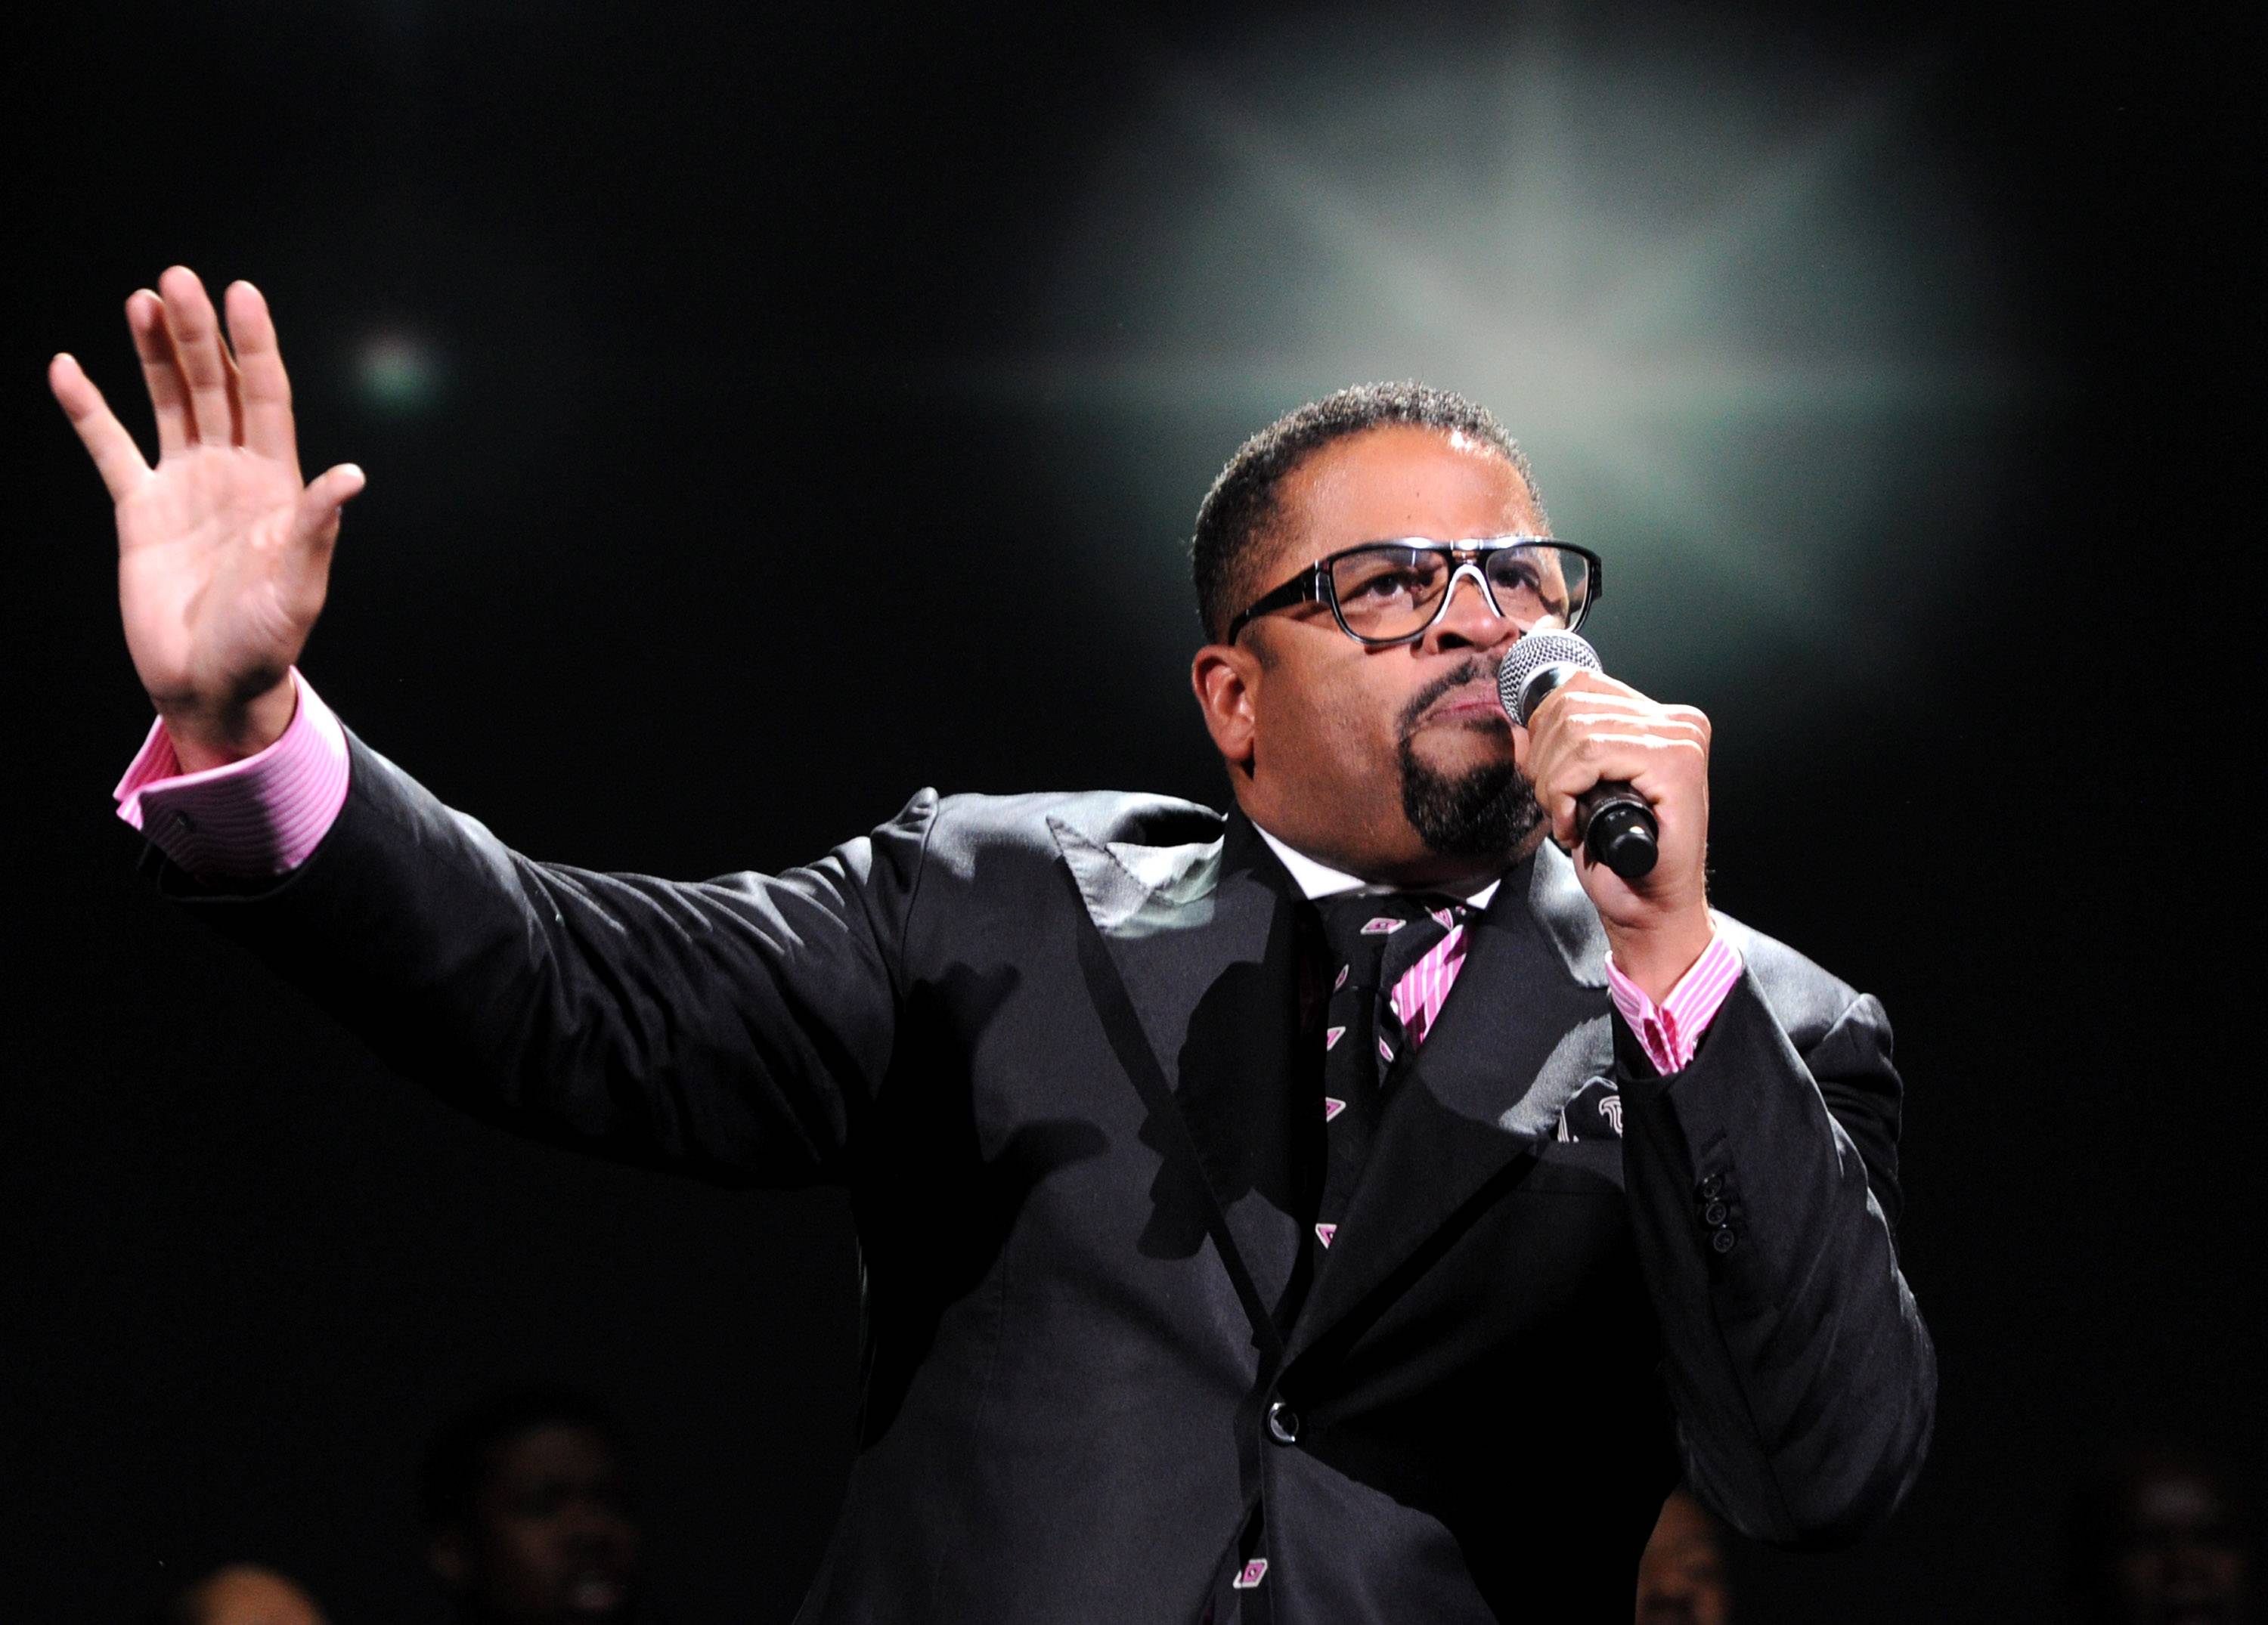 Bryon Cage - Known for his songs &quot;The Presence of the Lord&quot; and &quot;I Will Bless The Lord,&quot; Byron Cage is a true minister of music. (Photo: Rick Diamond/Getty Images for Verizon)